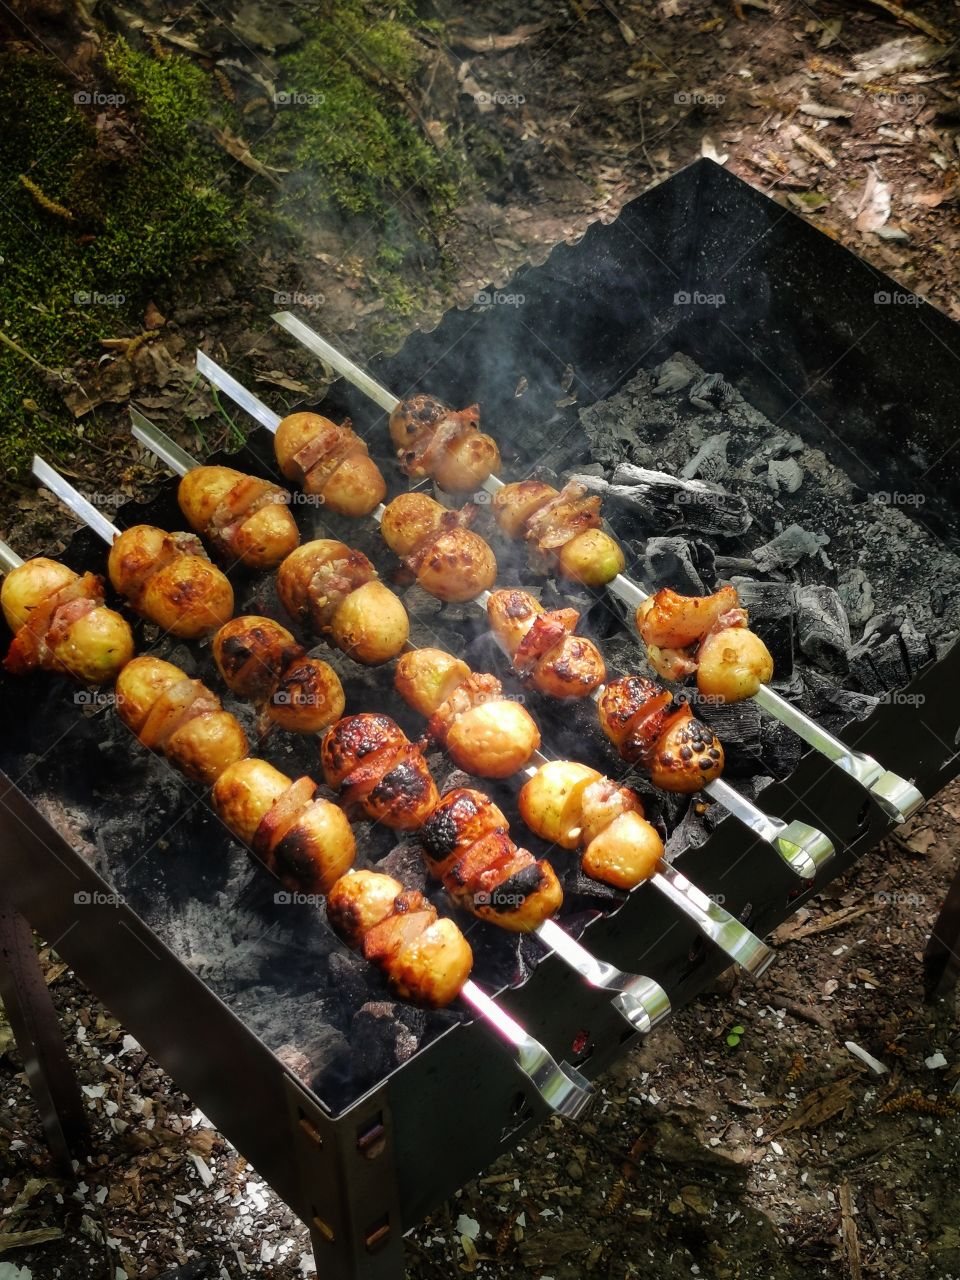 Food yummy served meat fire day outdoor nature greens wild forest wild